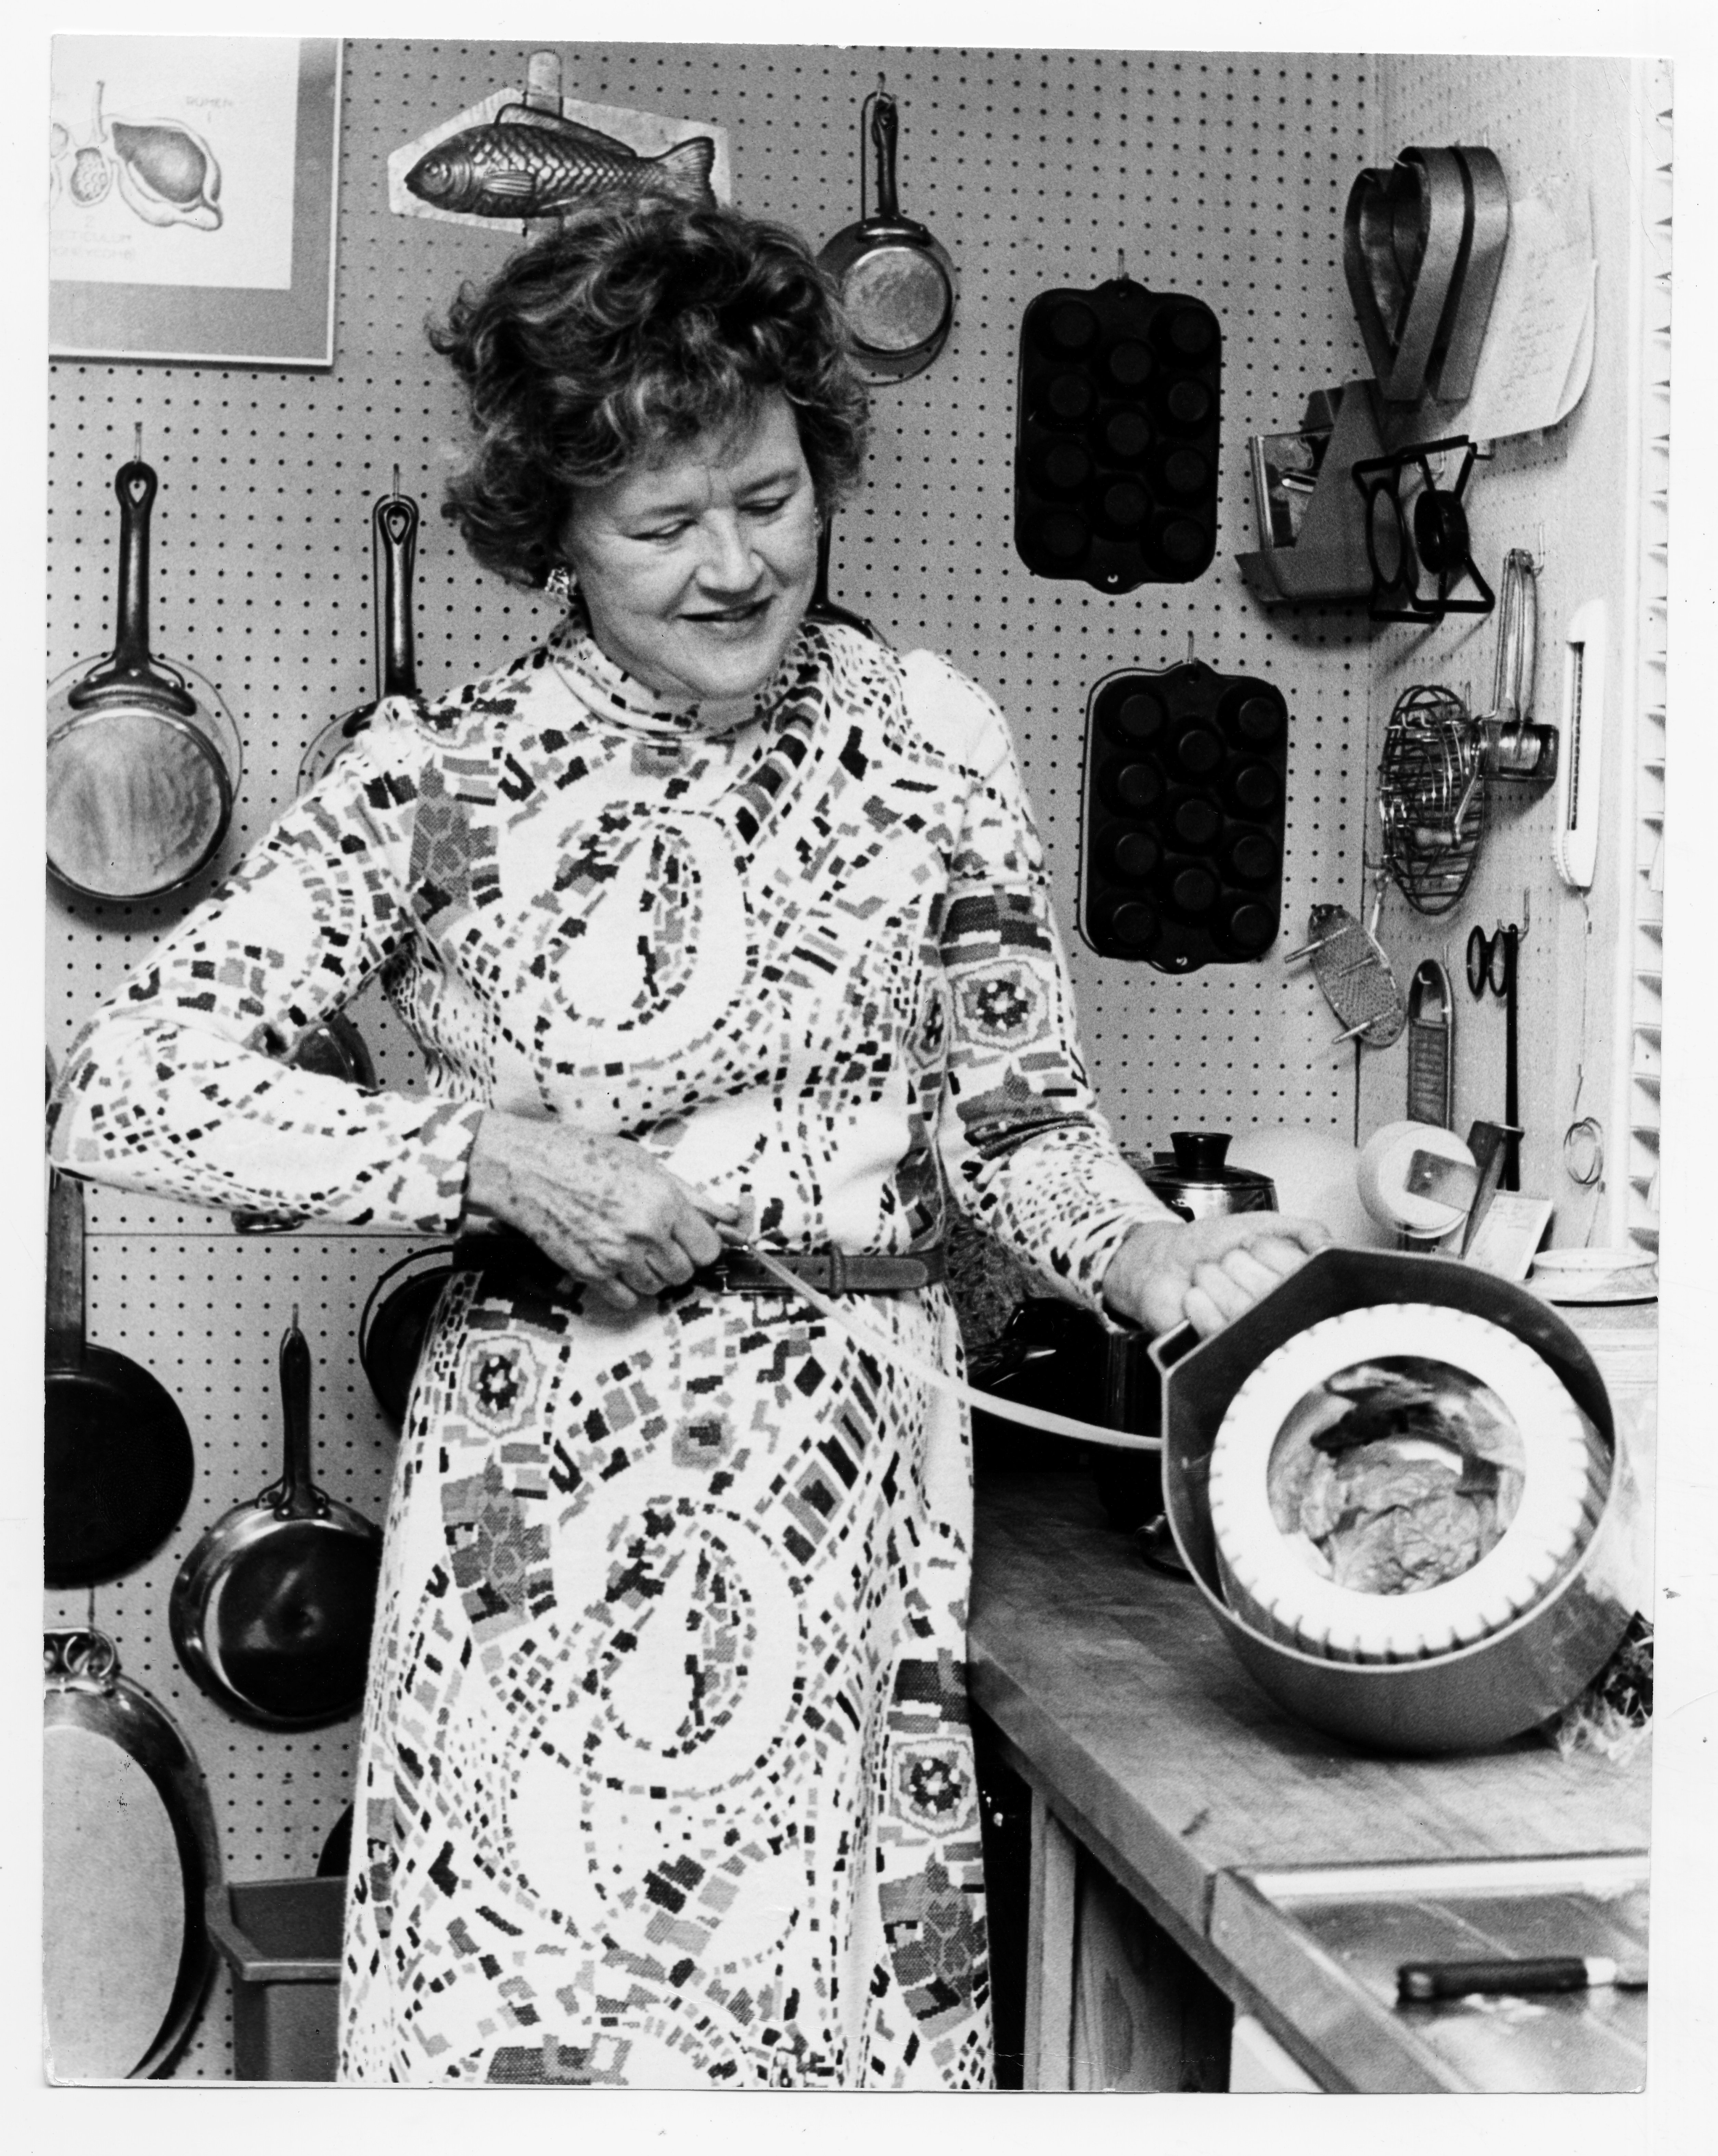 Julia Child dries lettuce at her home in Cambridge Massachusetts on October 19, 1972. Photo: Getty Images